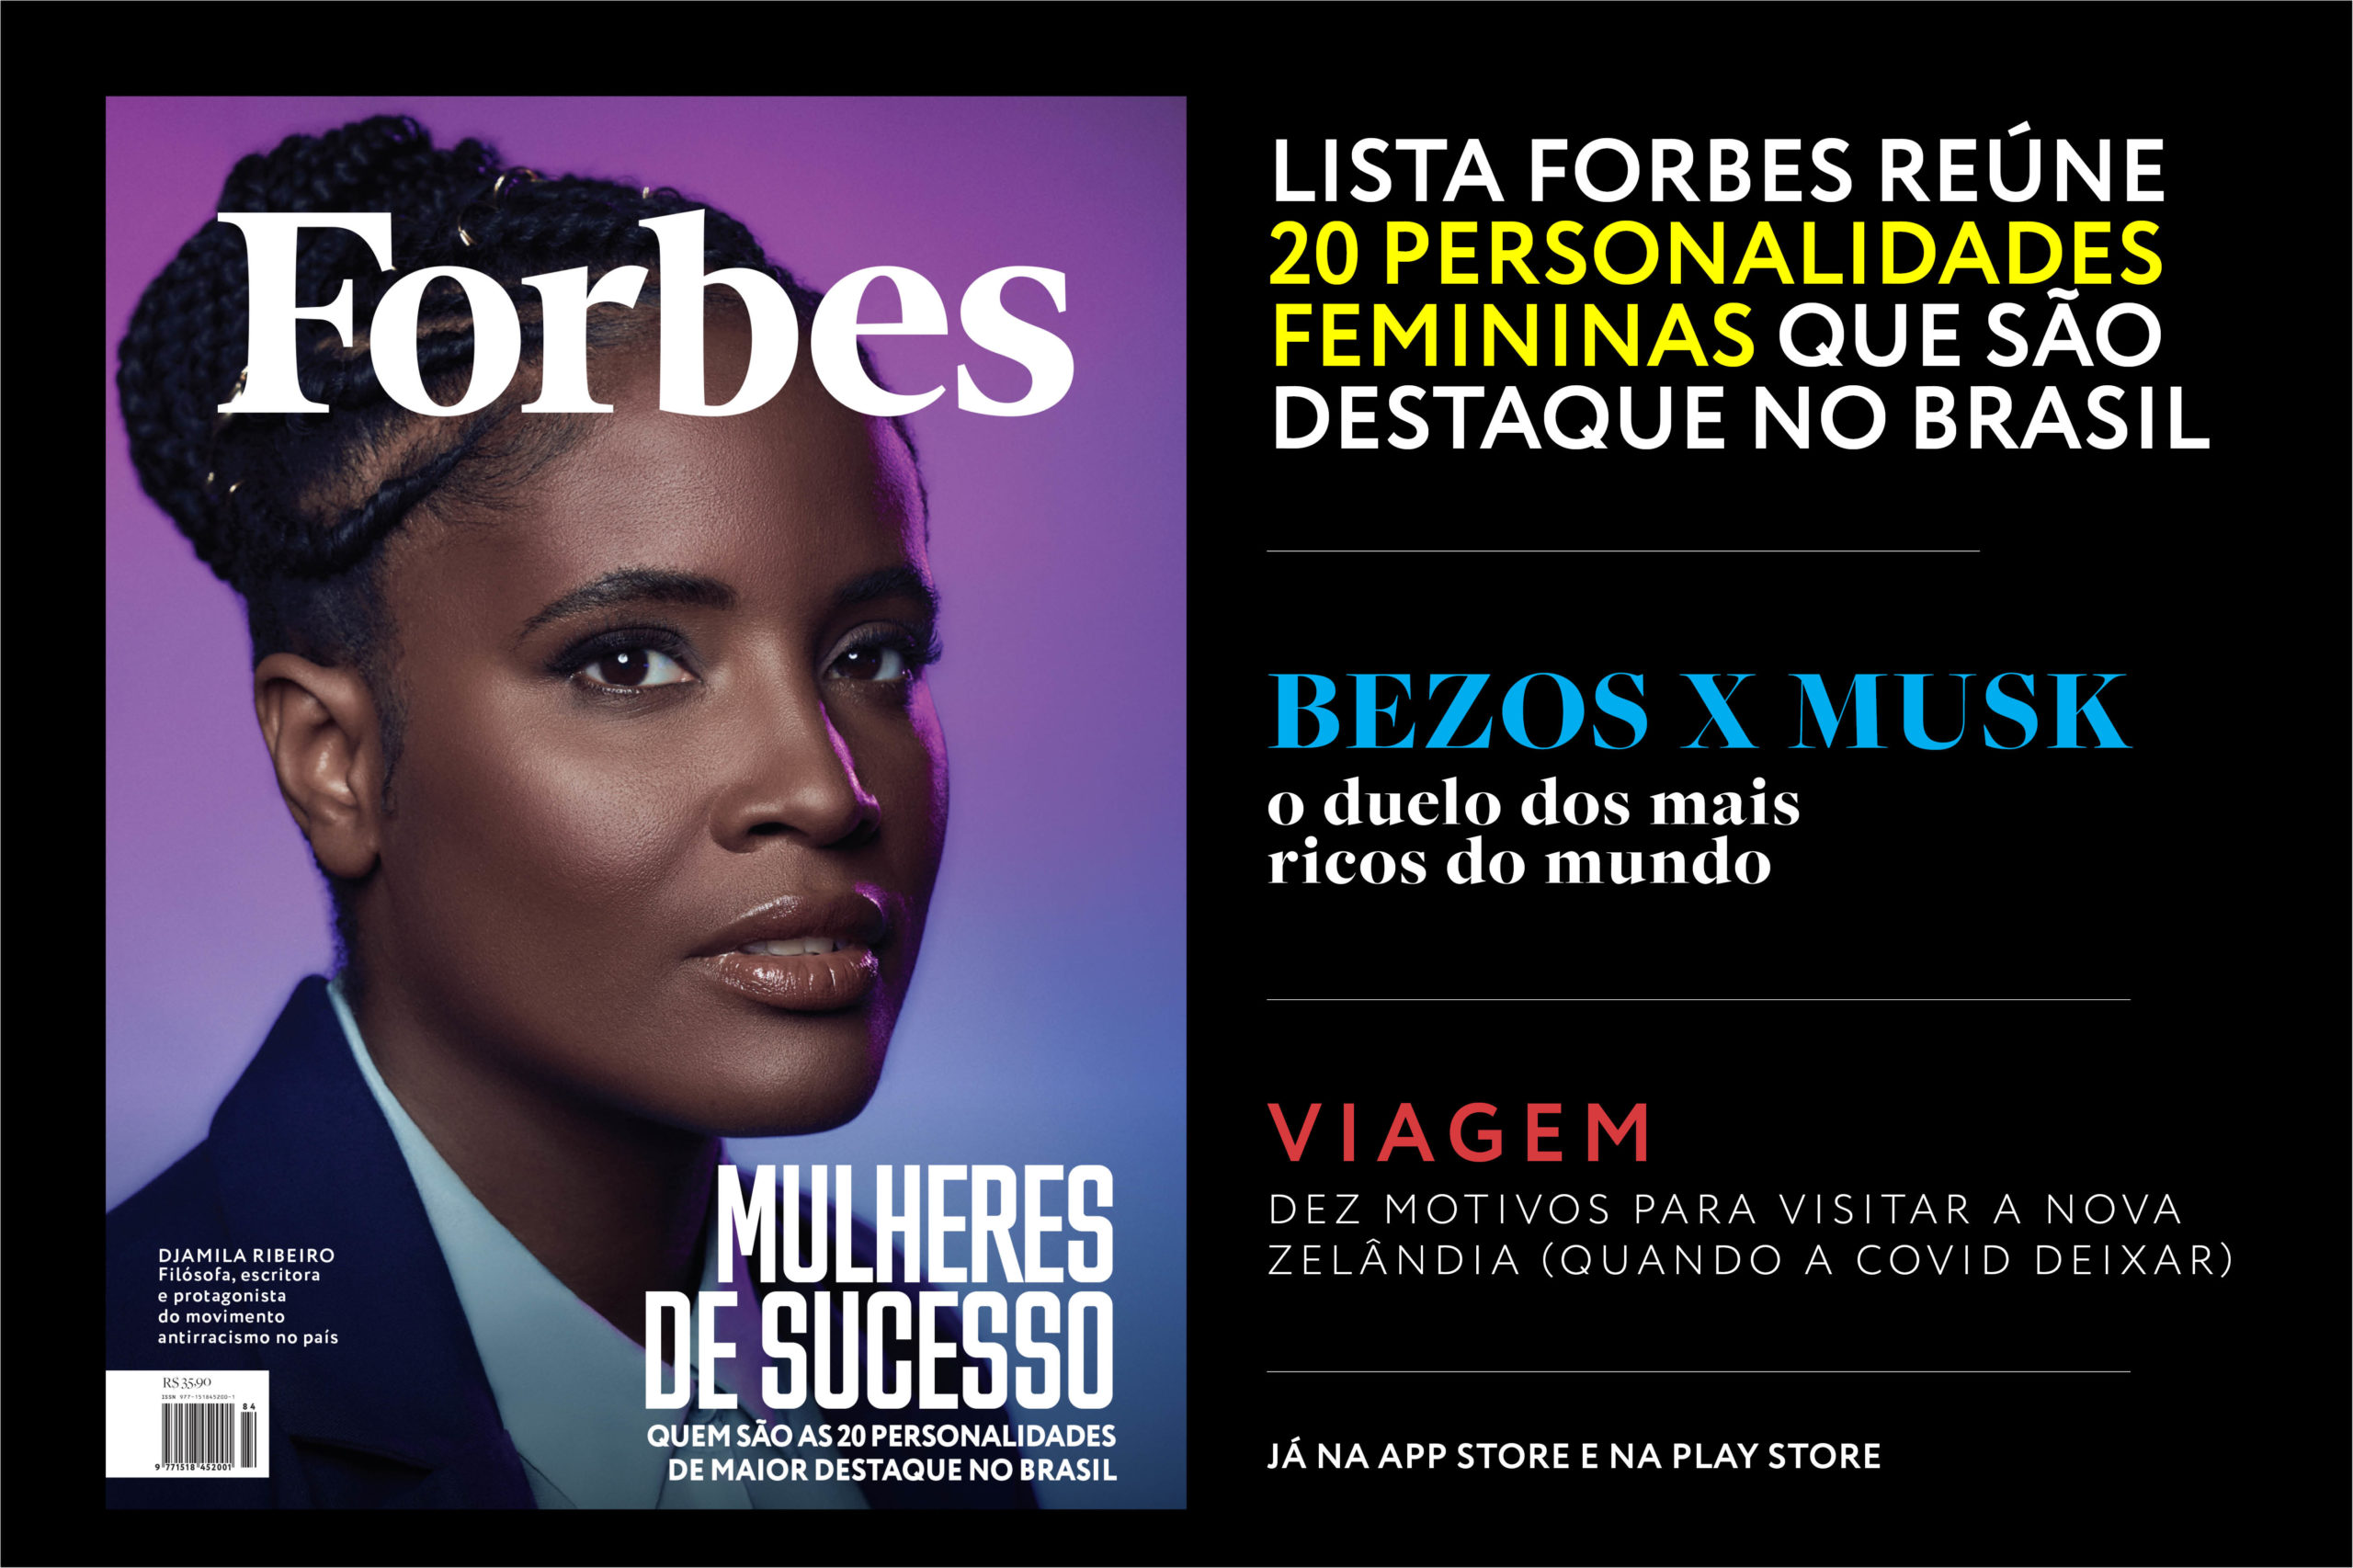 It reads: Successful women, who are the 20 most prominent female personalities in Brazil